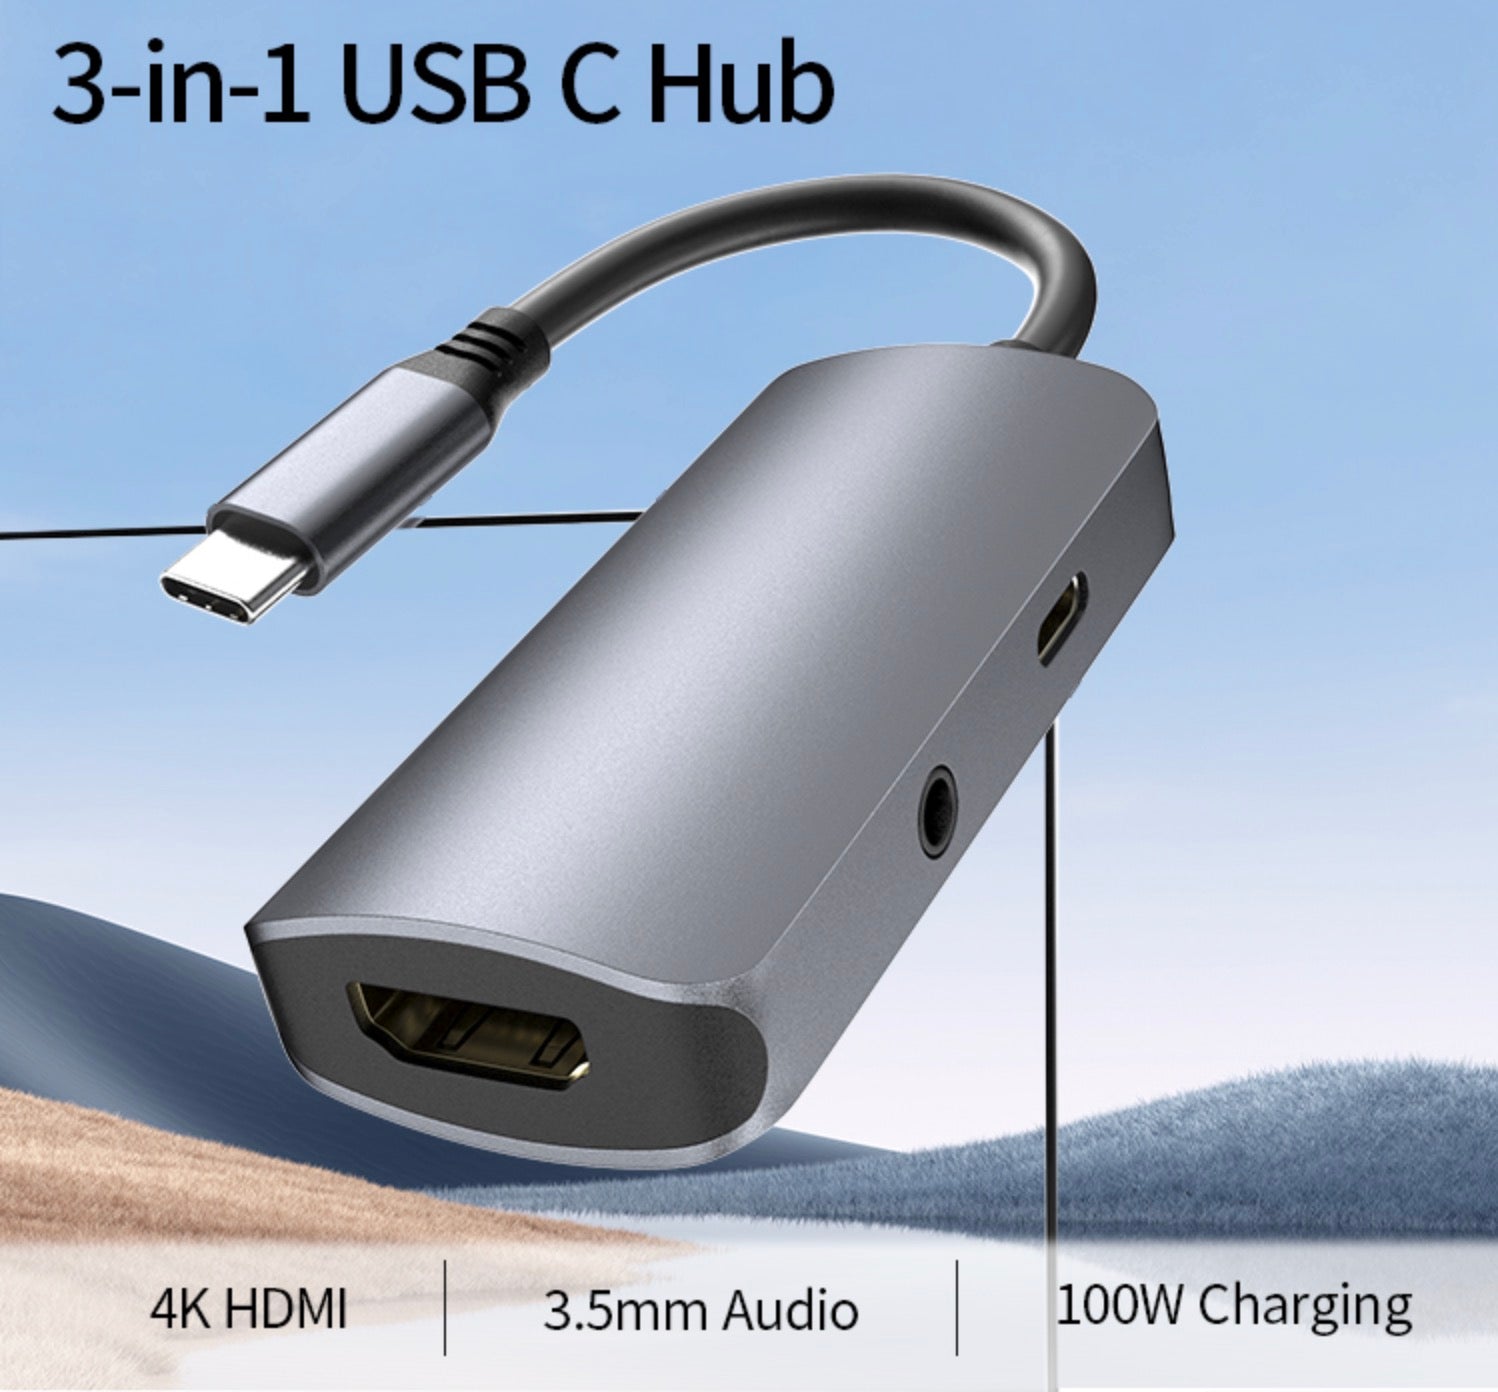 USB-C 3-in-1 Hub with HDMI 4K, 3.5mm Audio and PD 100W Port